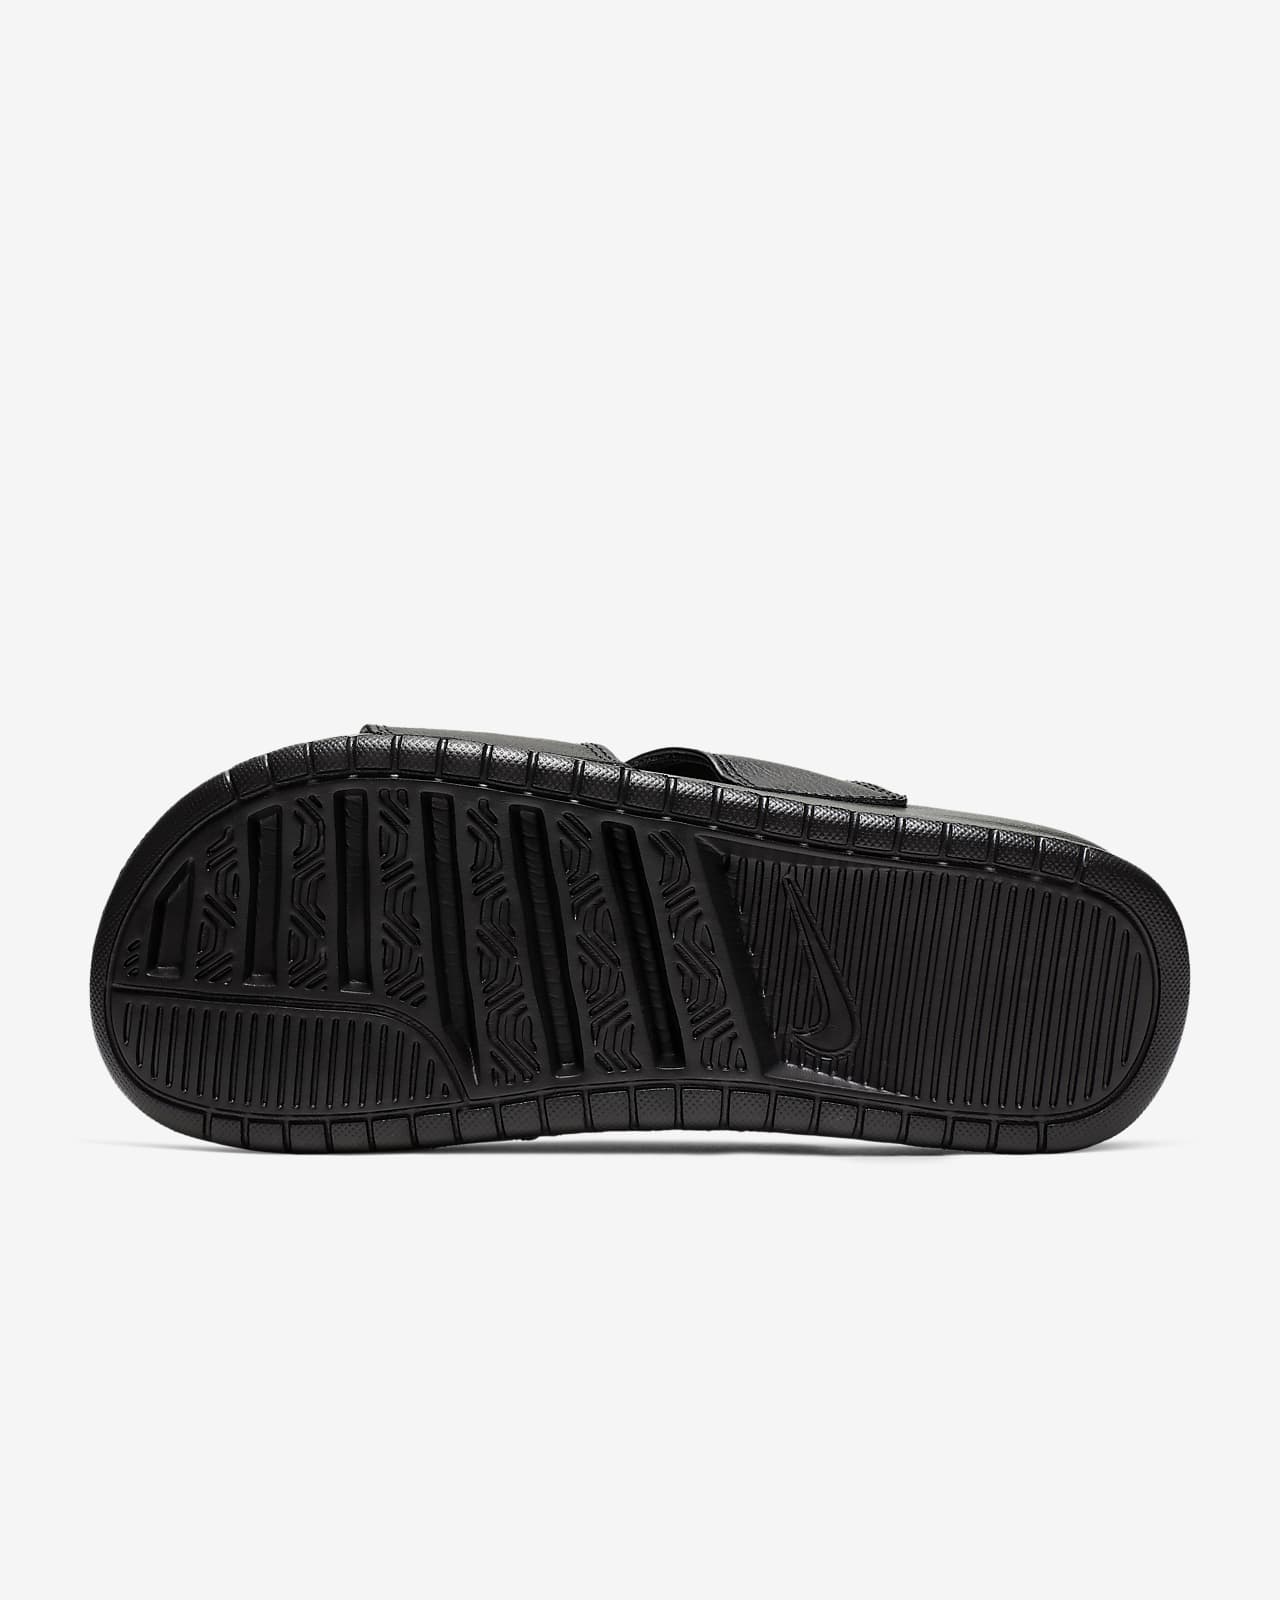 nike sandals with straps on the back